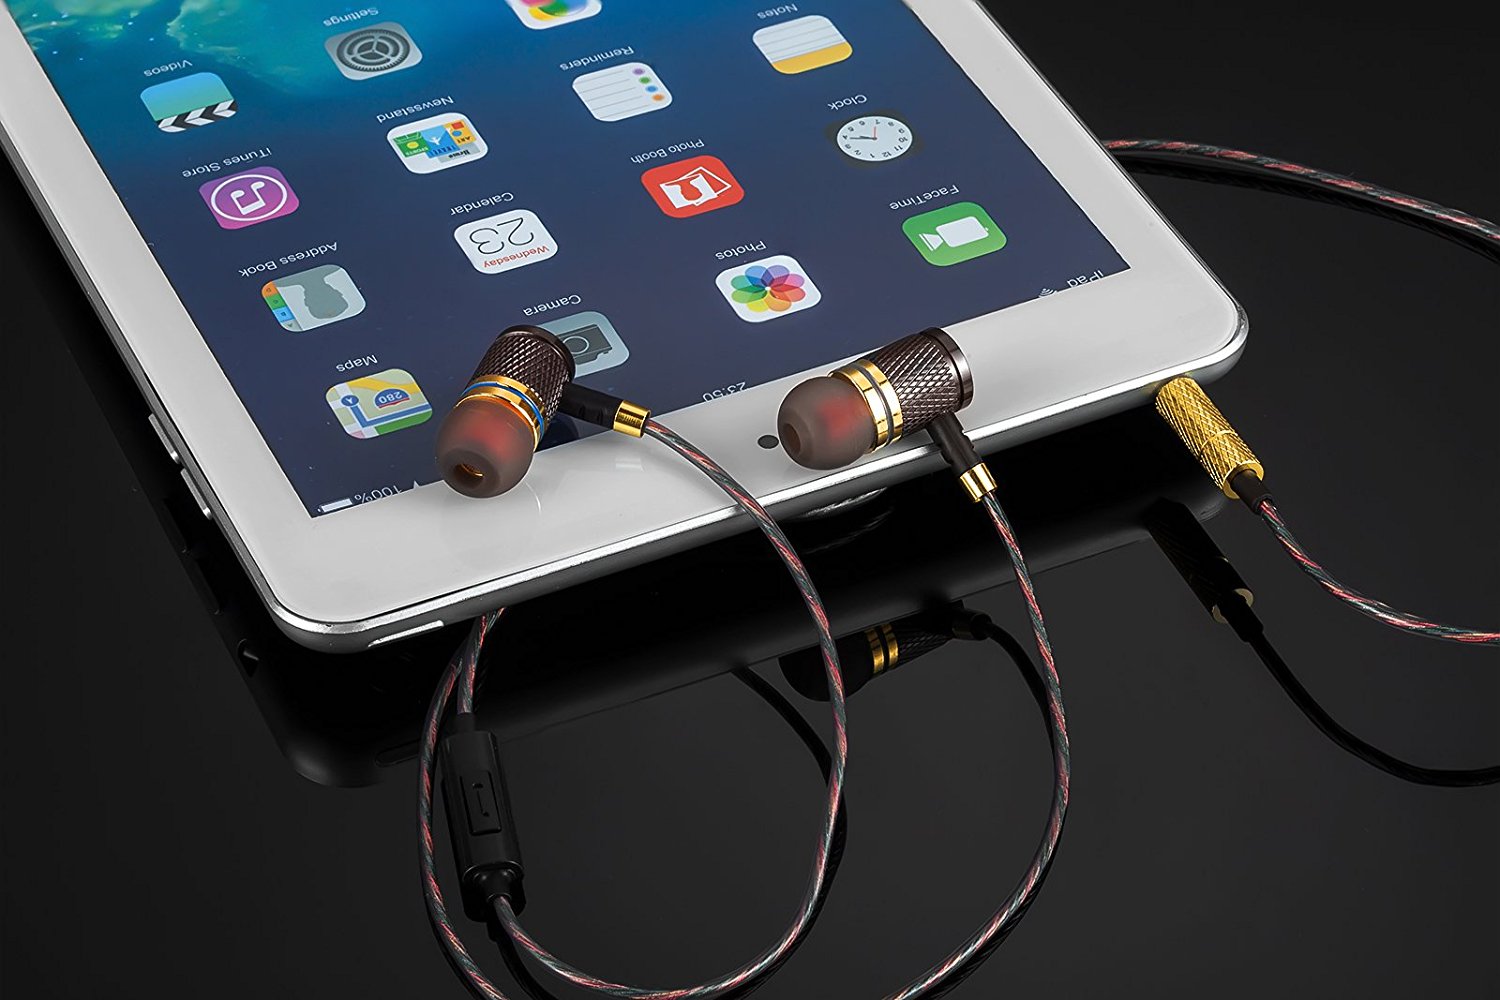 Best earbuds under $20: the YSM1000 on a white iPad with a black background